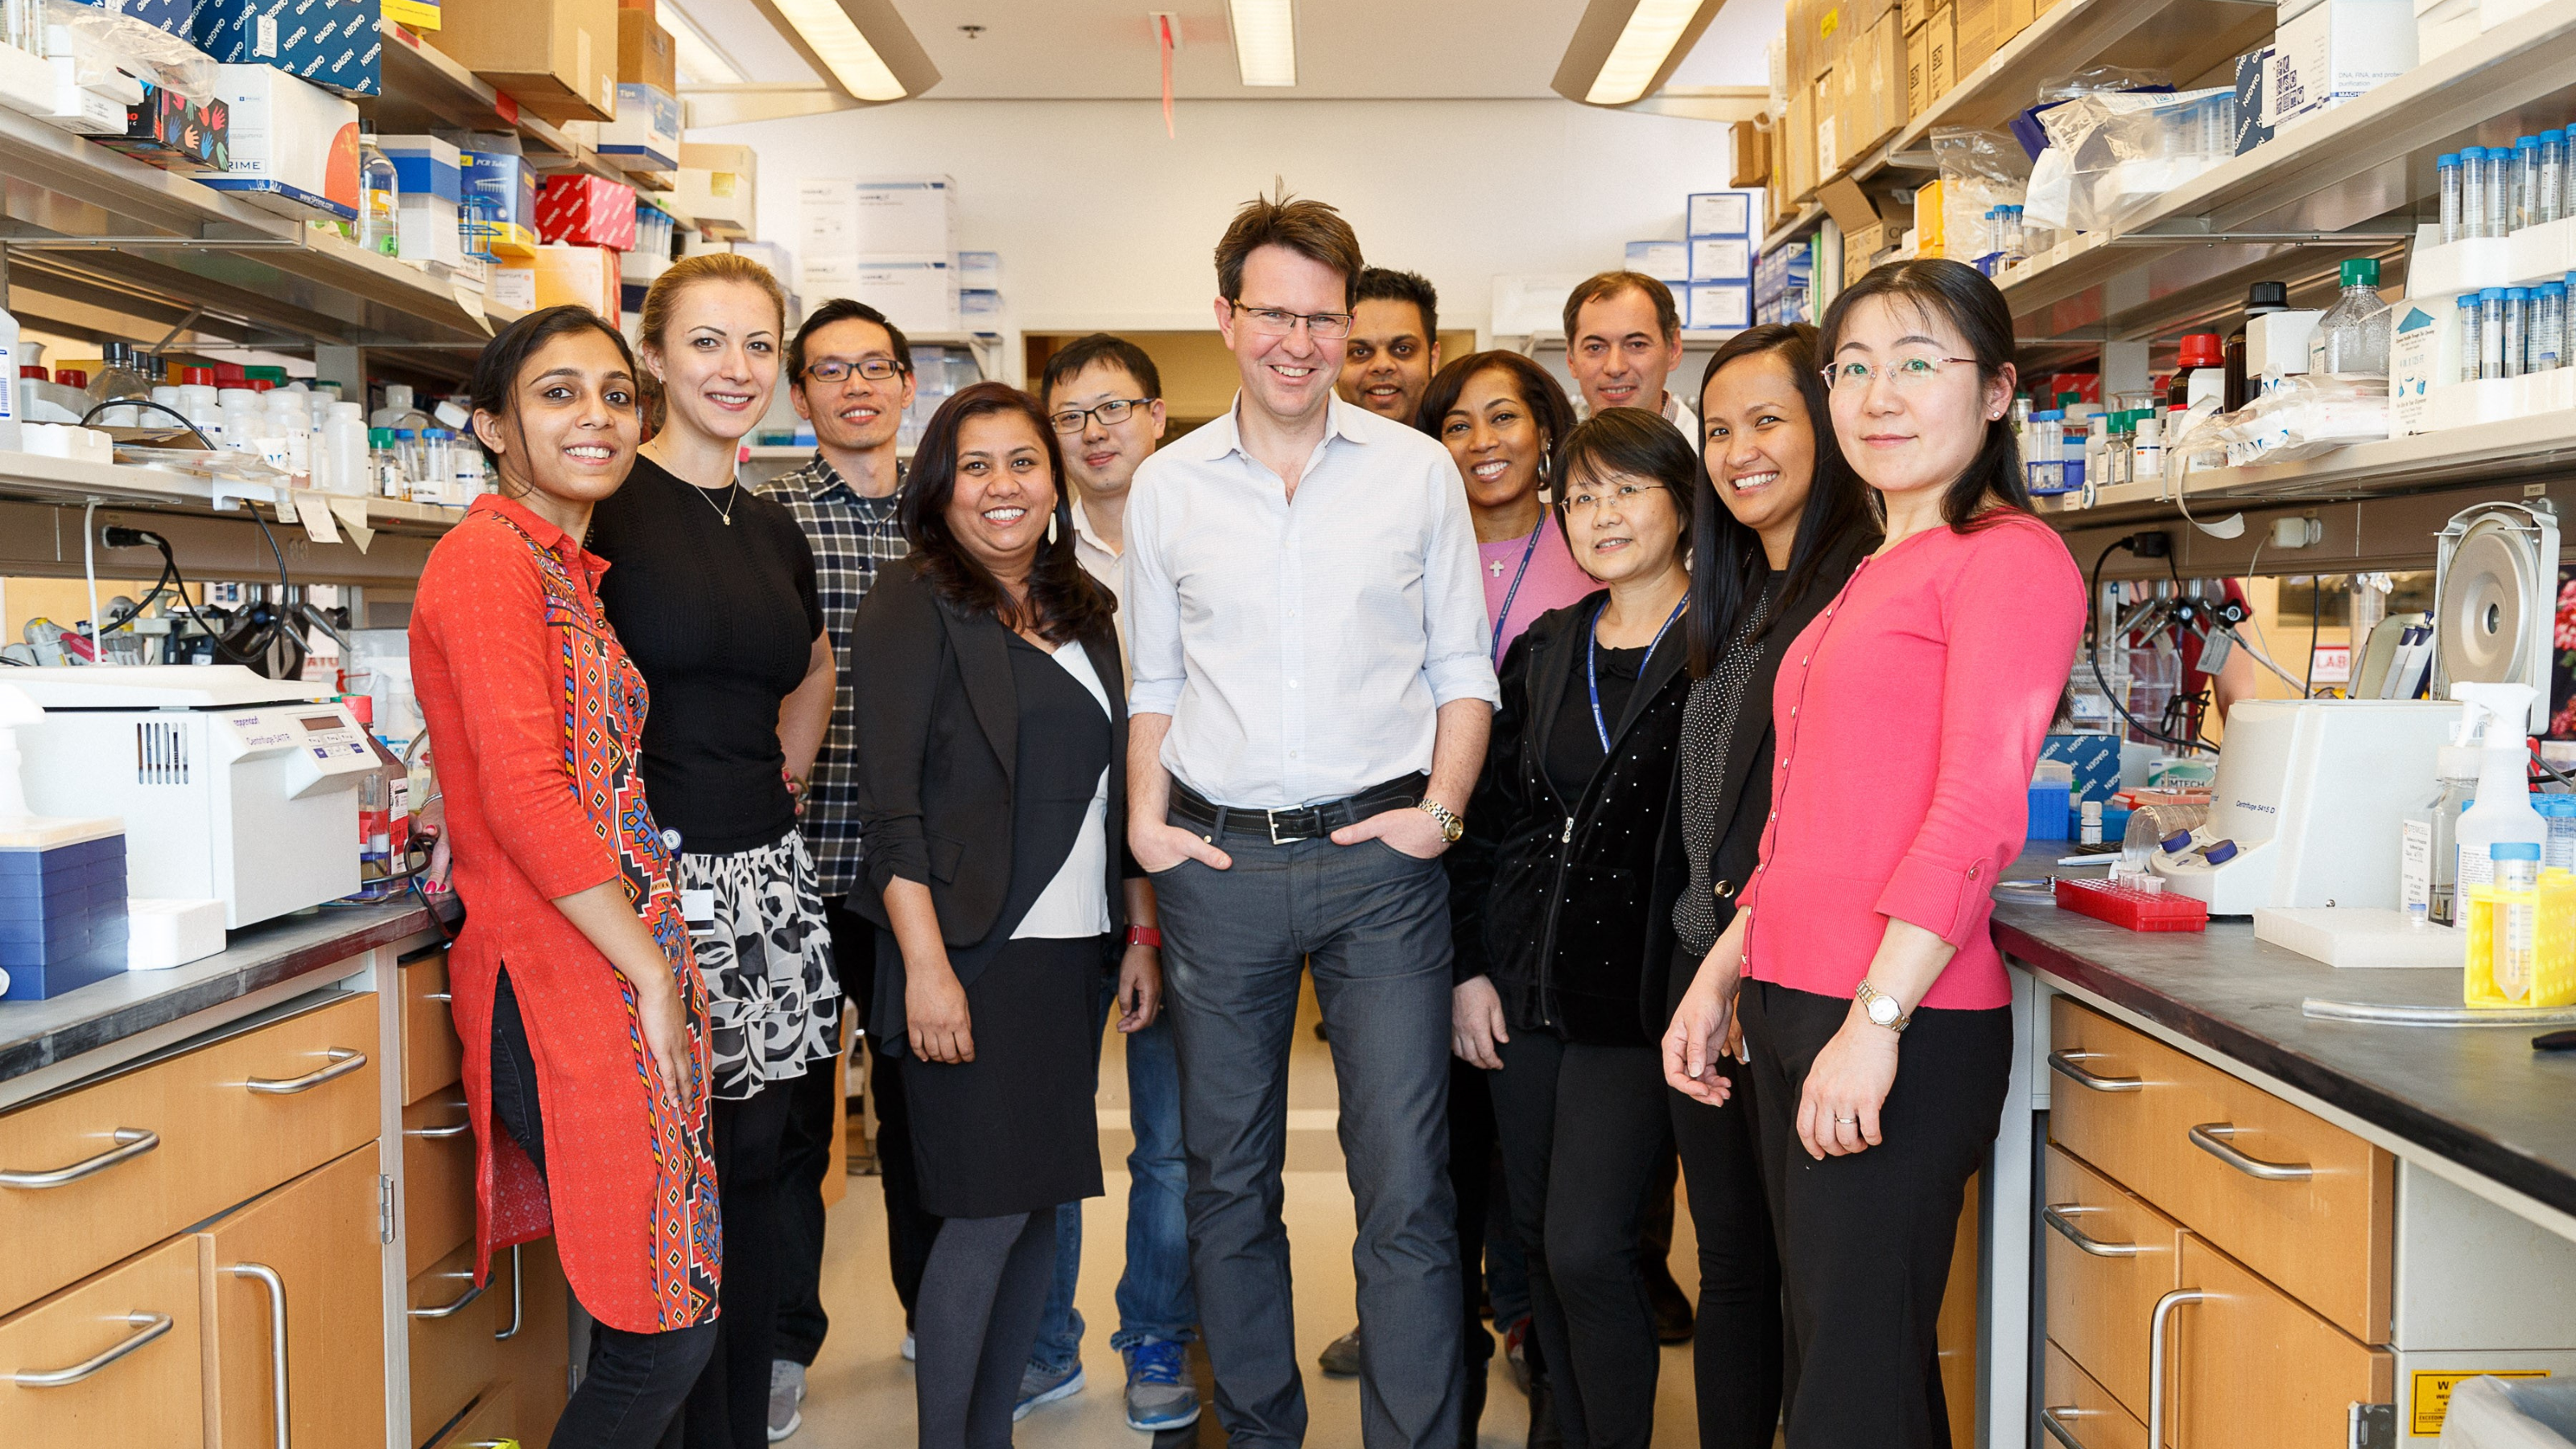 Dr. Wendel's Lab - Lymphoma Research Foundation